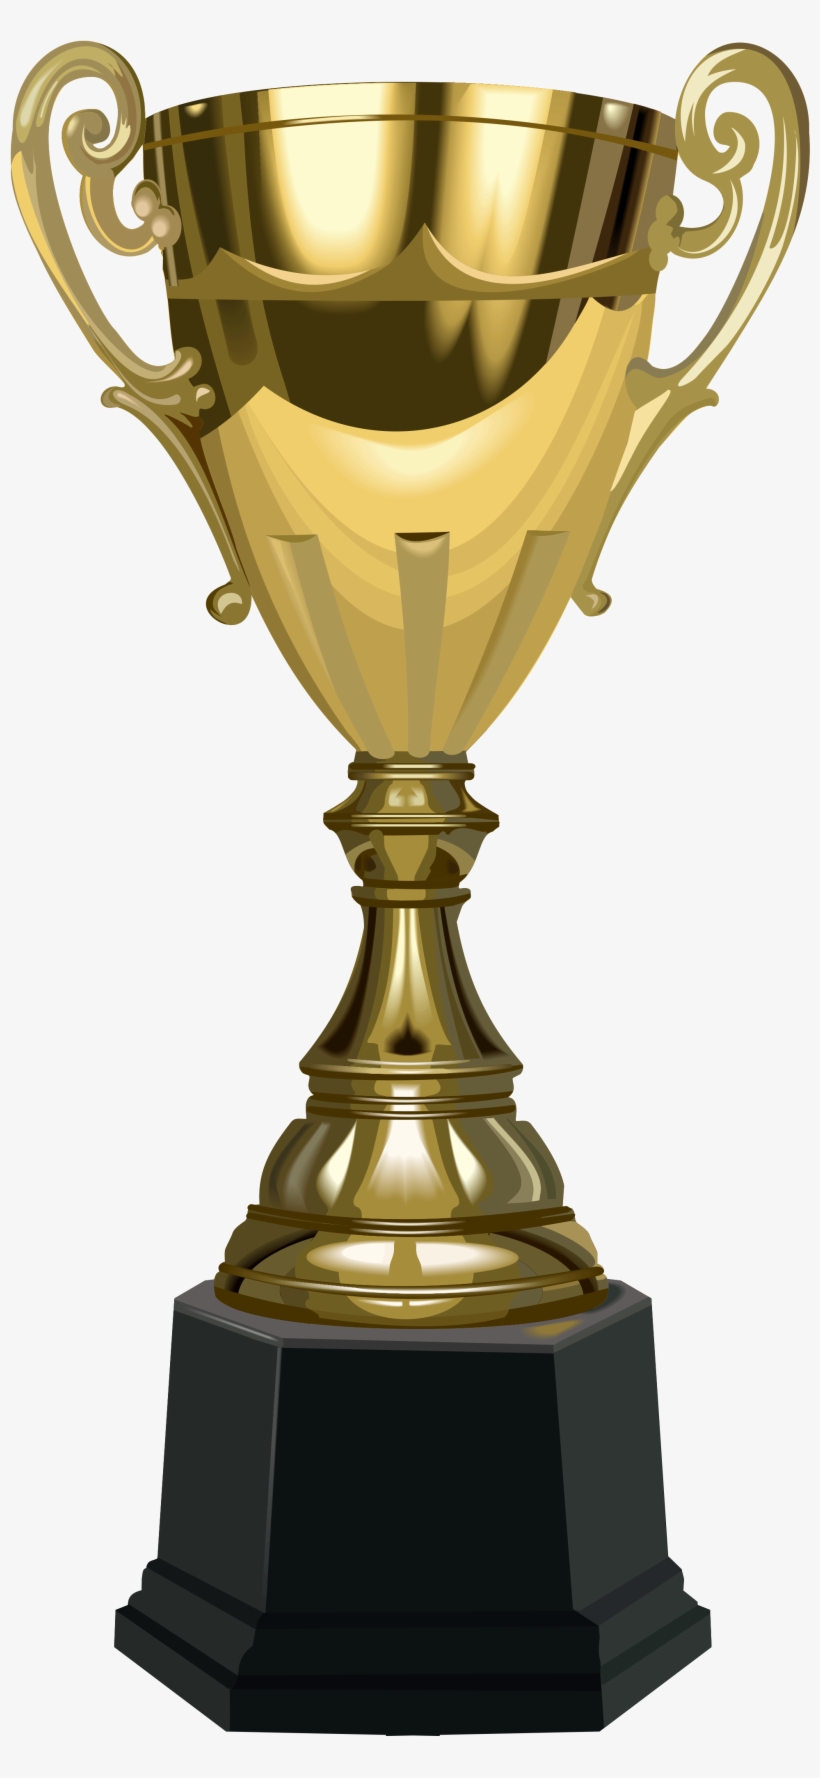 View Full Size - Award Cup Png, transparent png #192419